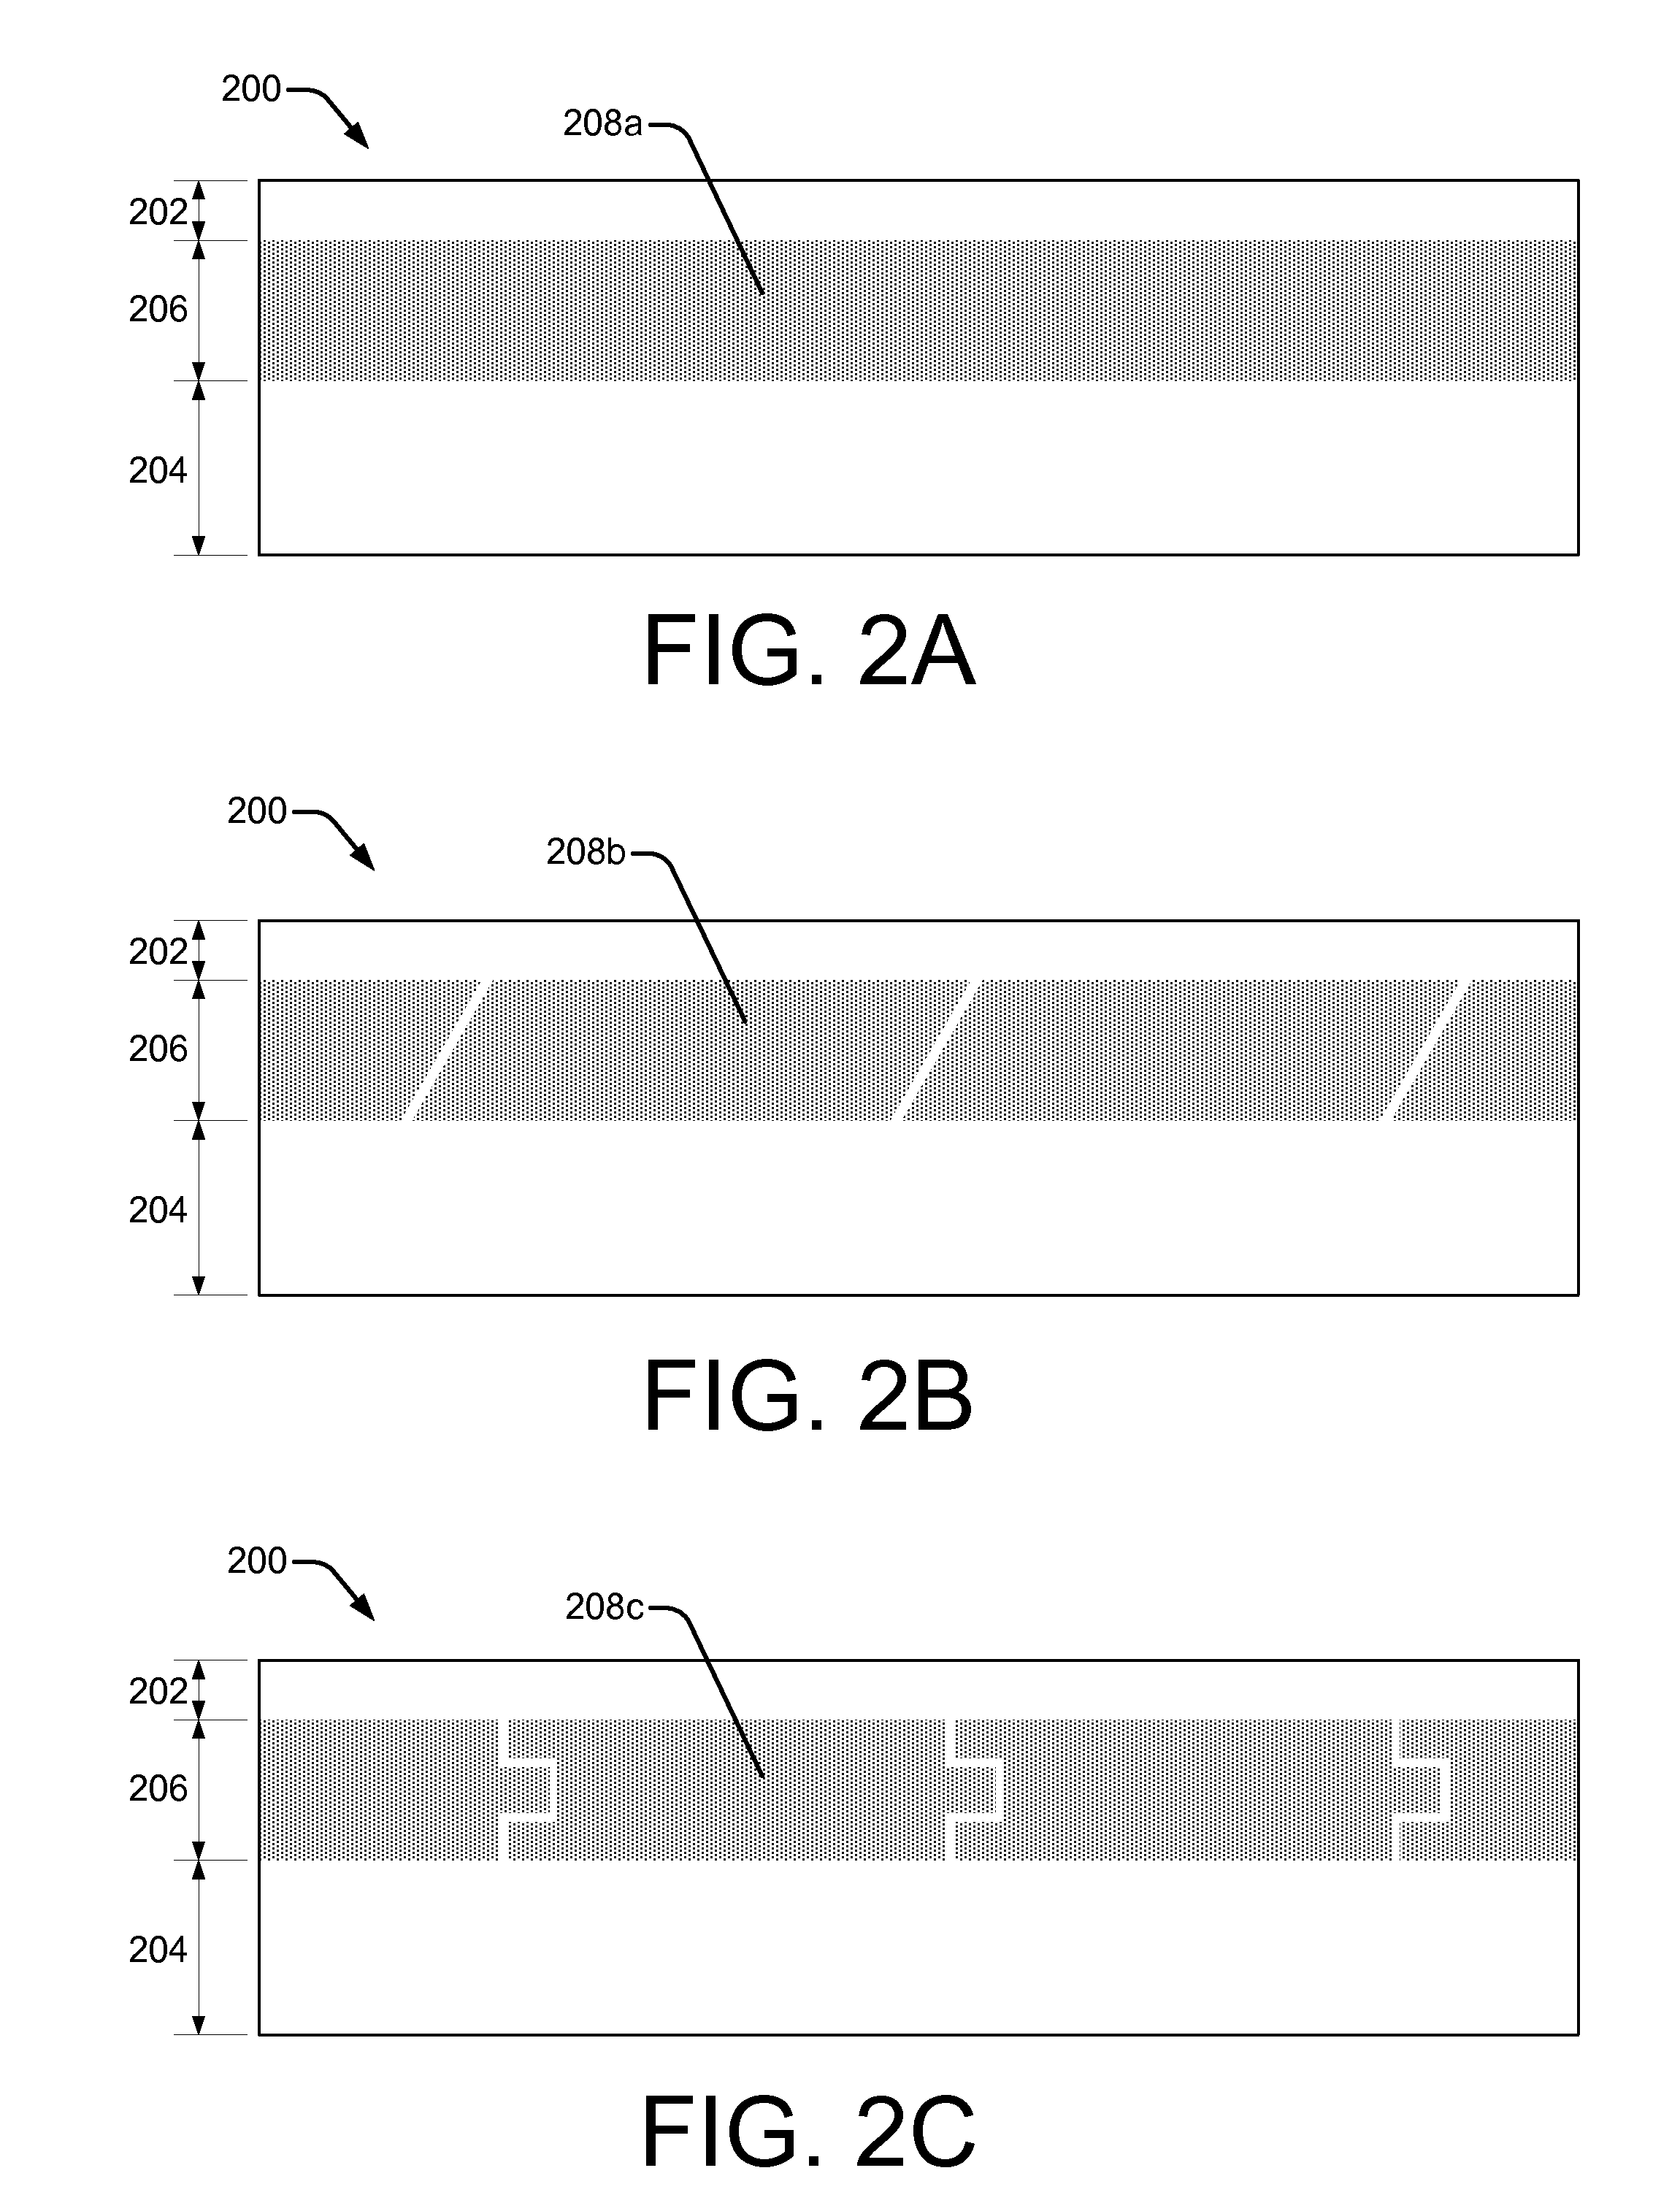 Composite components formed by coating a mold with ceramic material